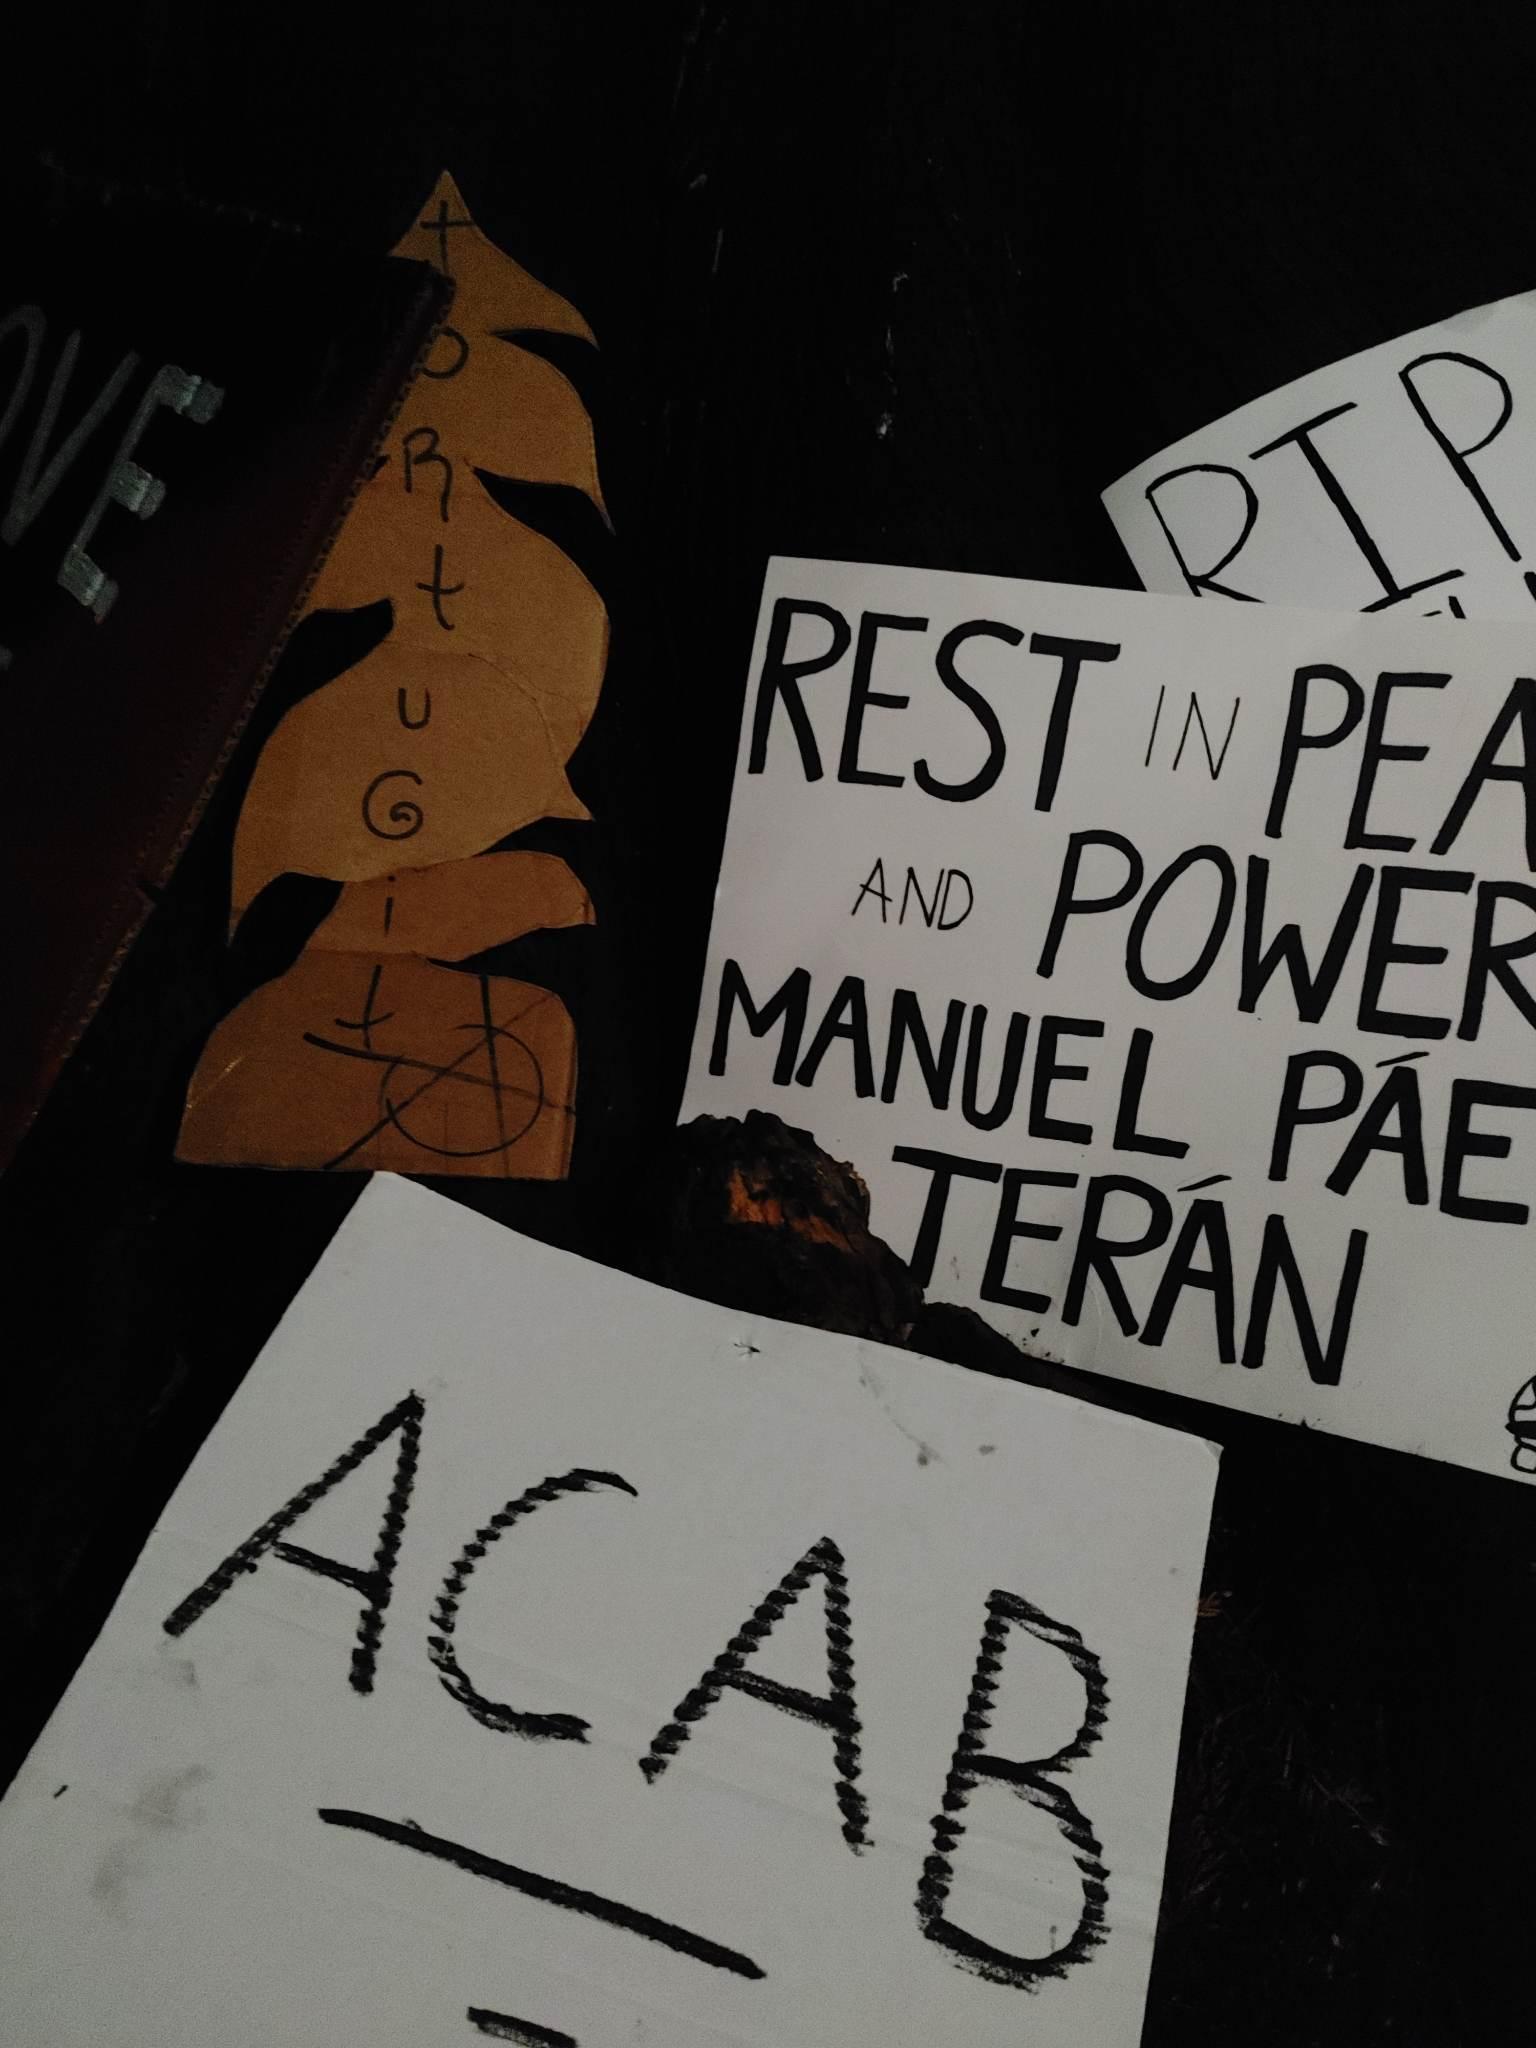 Several signs lay in a stack. One sign has a design of a tree and says "Tortuguita" with an anarchist circle-A symbol in the bottom right corner. The others say "ACAB", "REST IN PEACE AND POWER MANUEL PAEZ TERAN", and another is out of frame but the words "RIP" are visible.